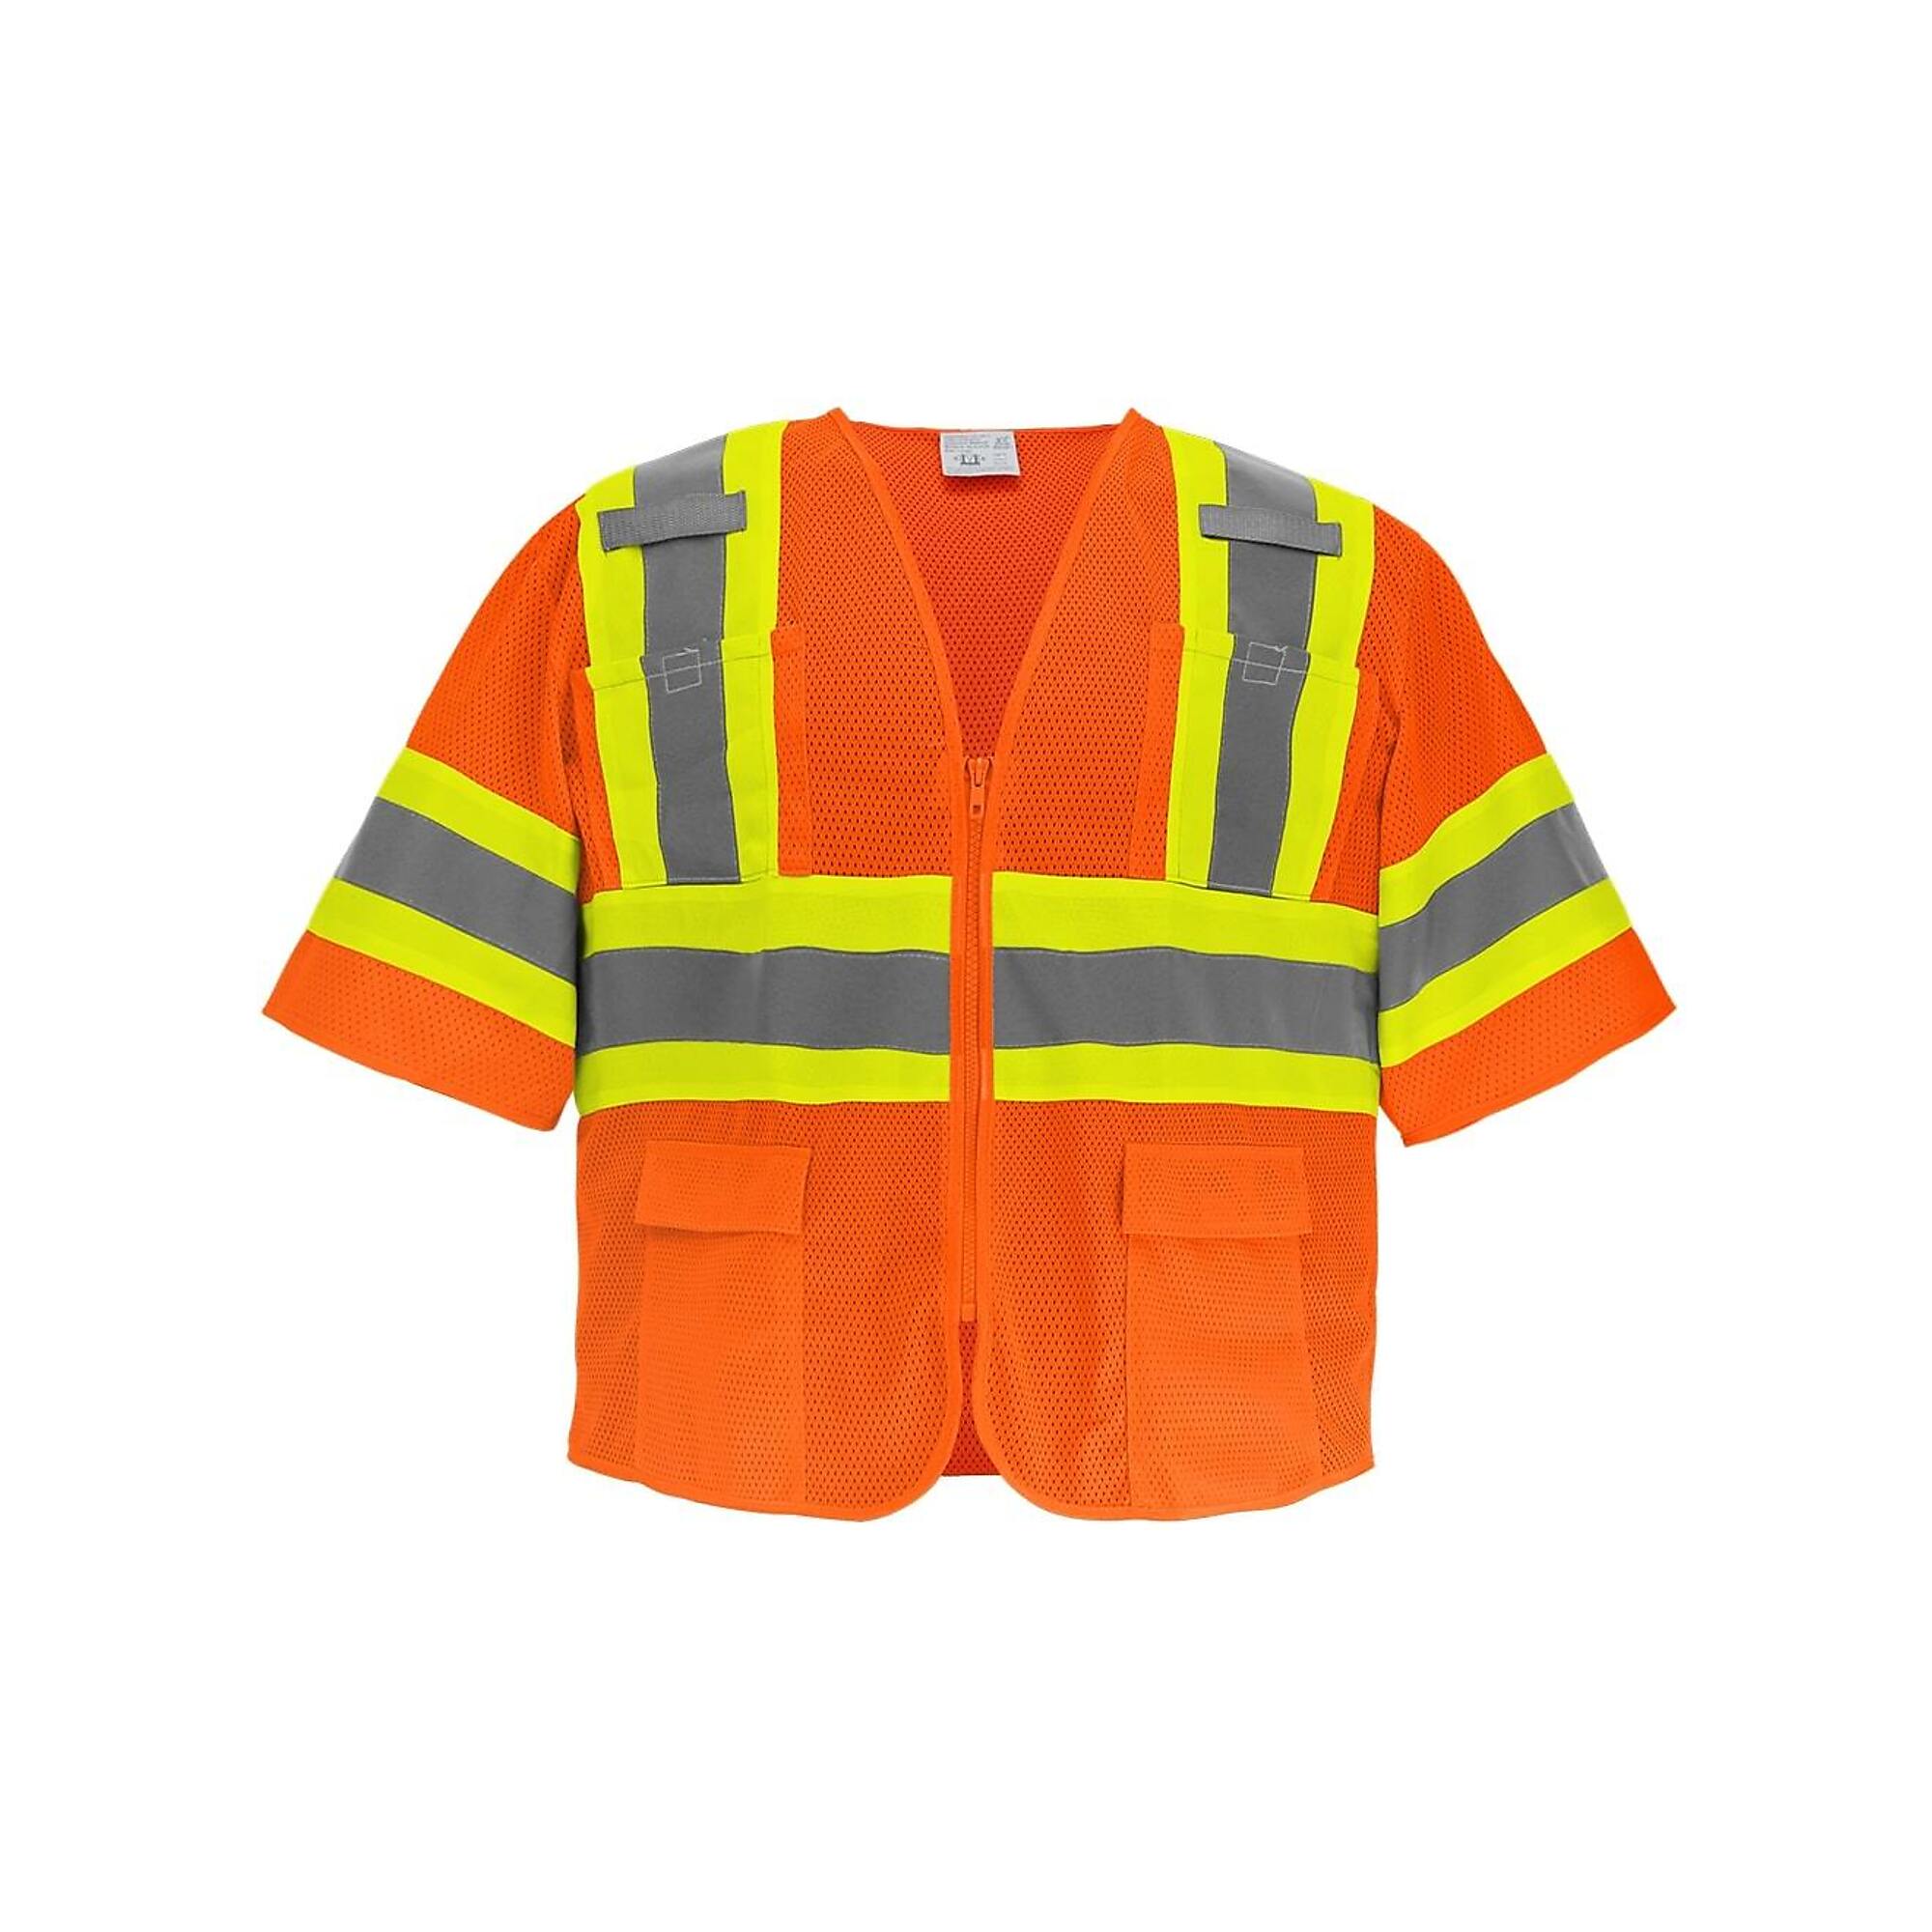 FrogWear, HV Orange, Class 3 6 Pockets, With Sleeves Mesh Vest, Size 3XL, Color High-Visibility Orange, Model GLO-0145-3XL